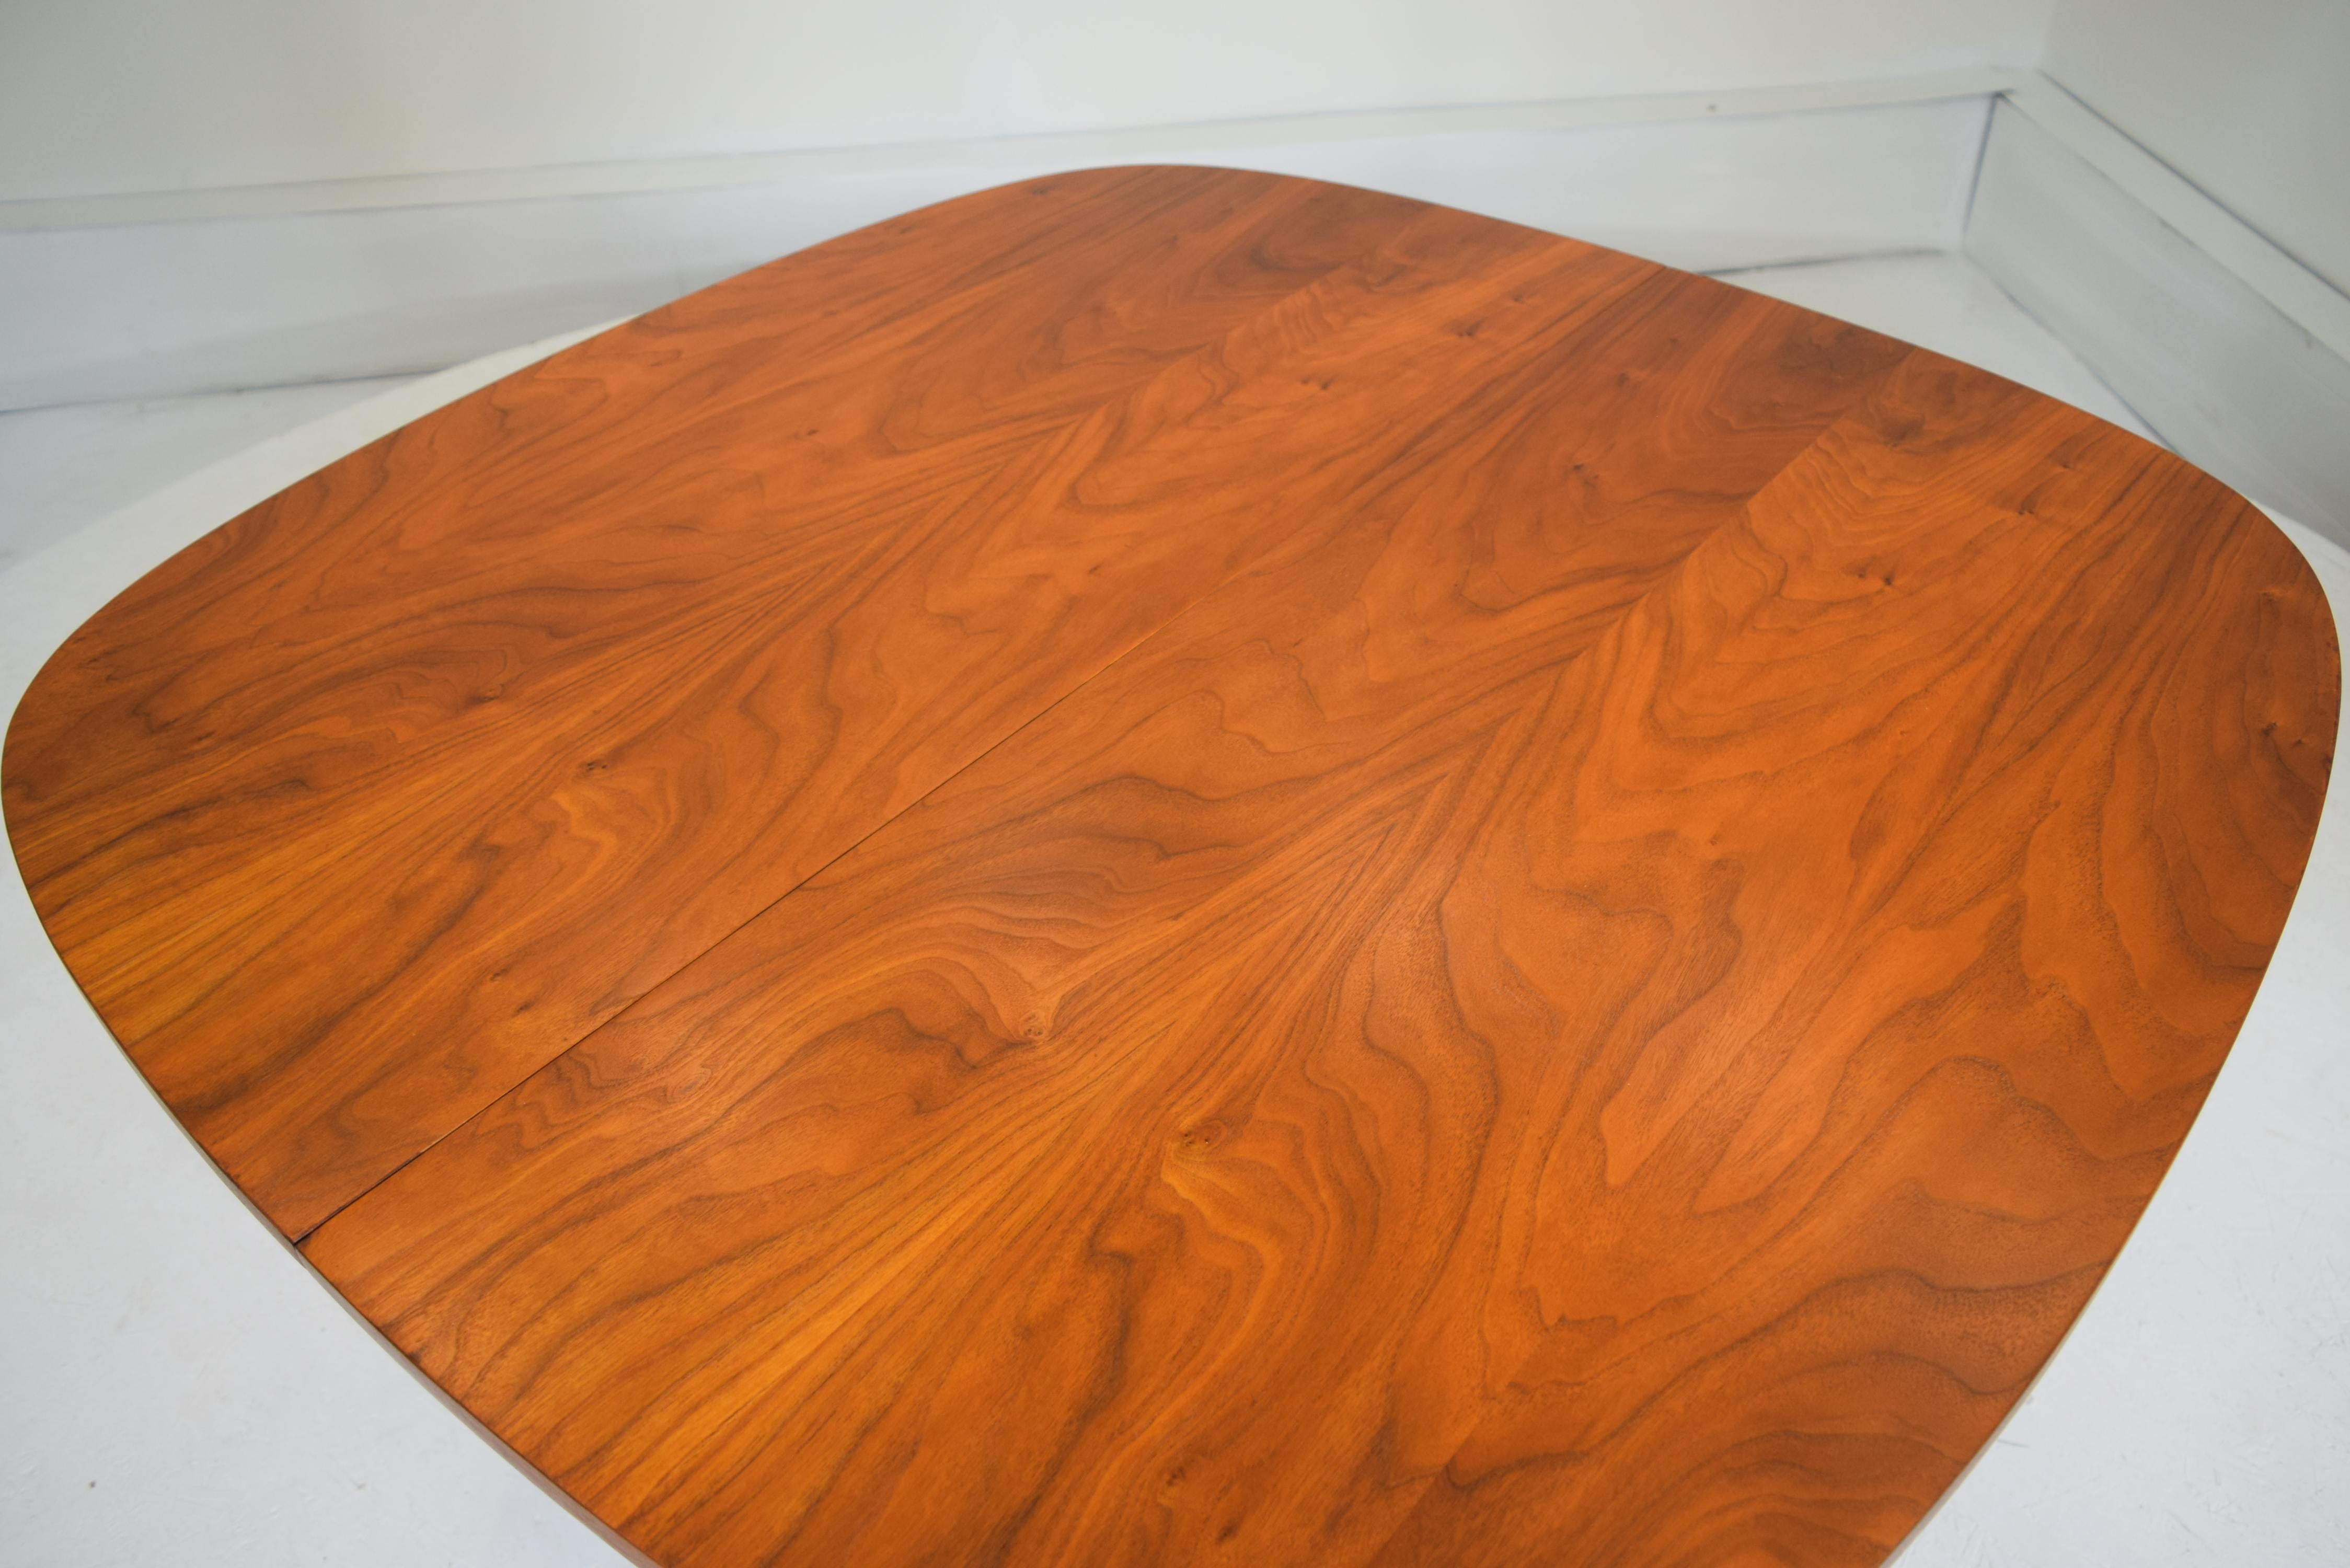 Broyhill, premier walnut dining table. Pristine like new condition. Heavy and sturdy, American black walnut used with dramatic effect. A perfect square table that extends with perfect cornering for elegance and practicality. Entirely refinished and